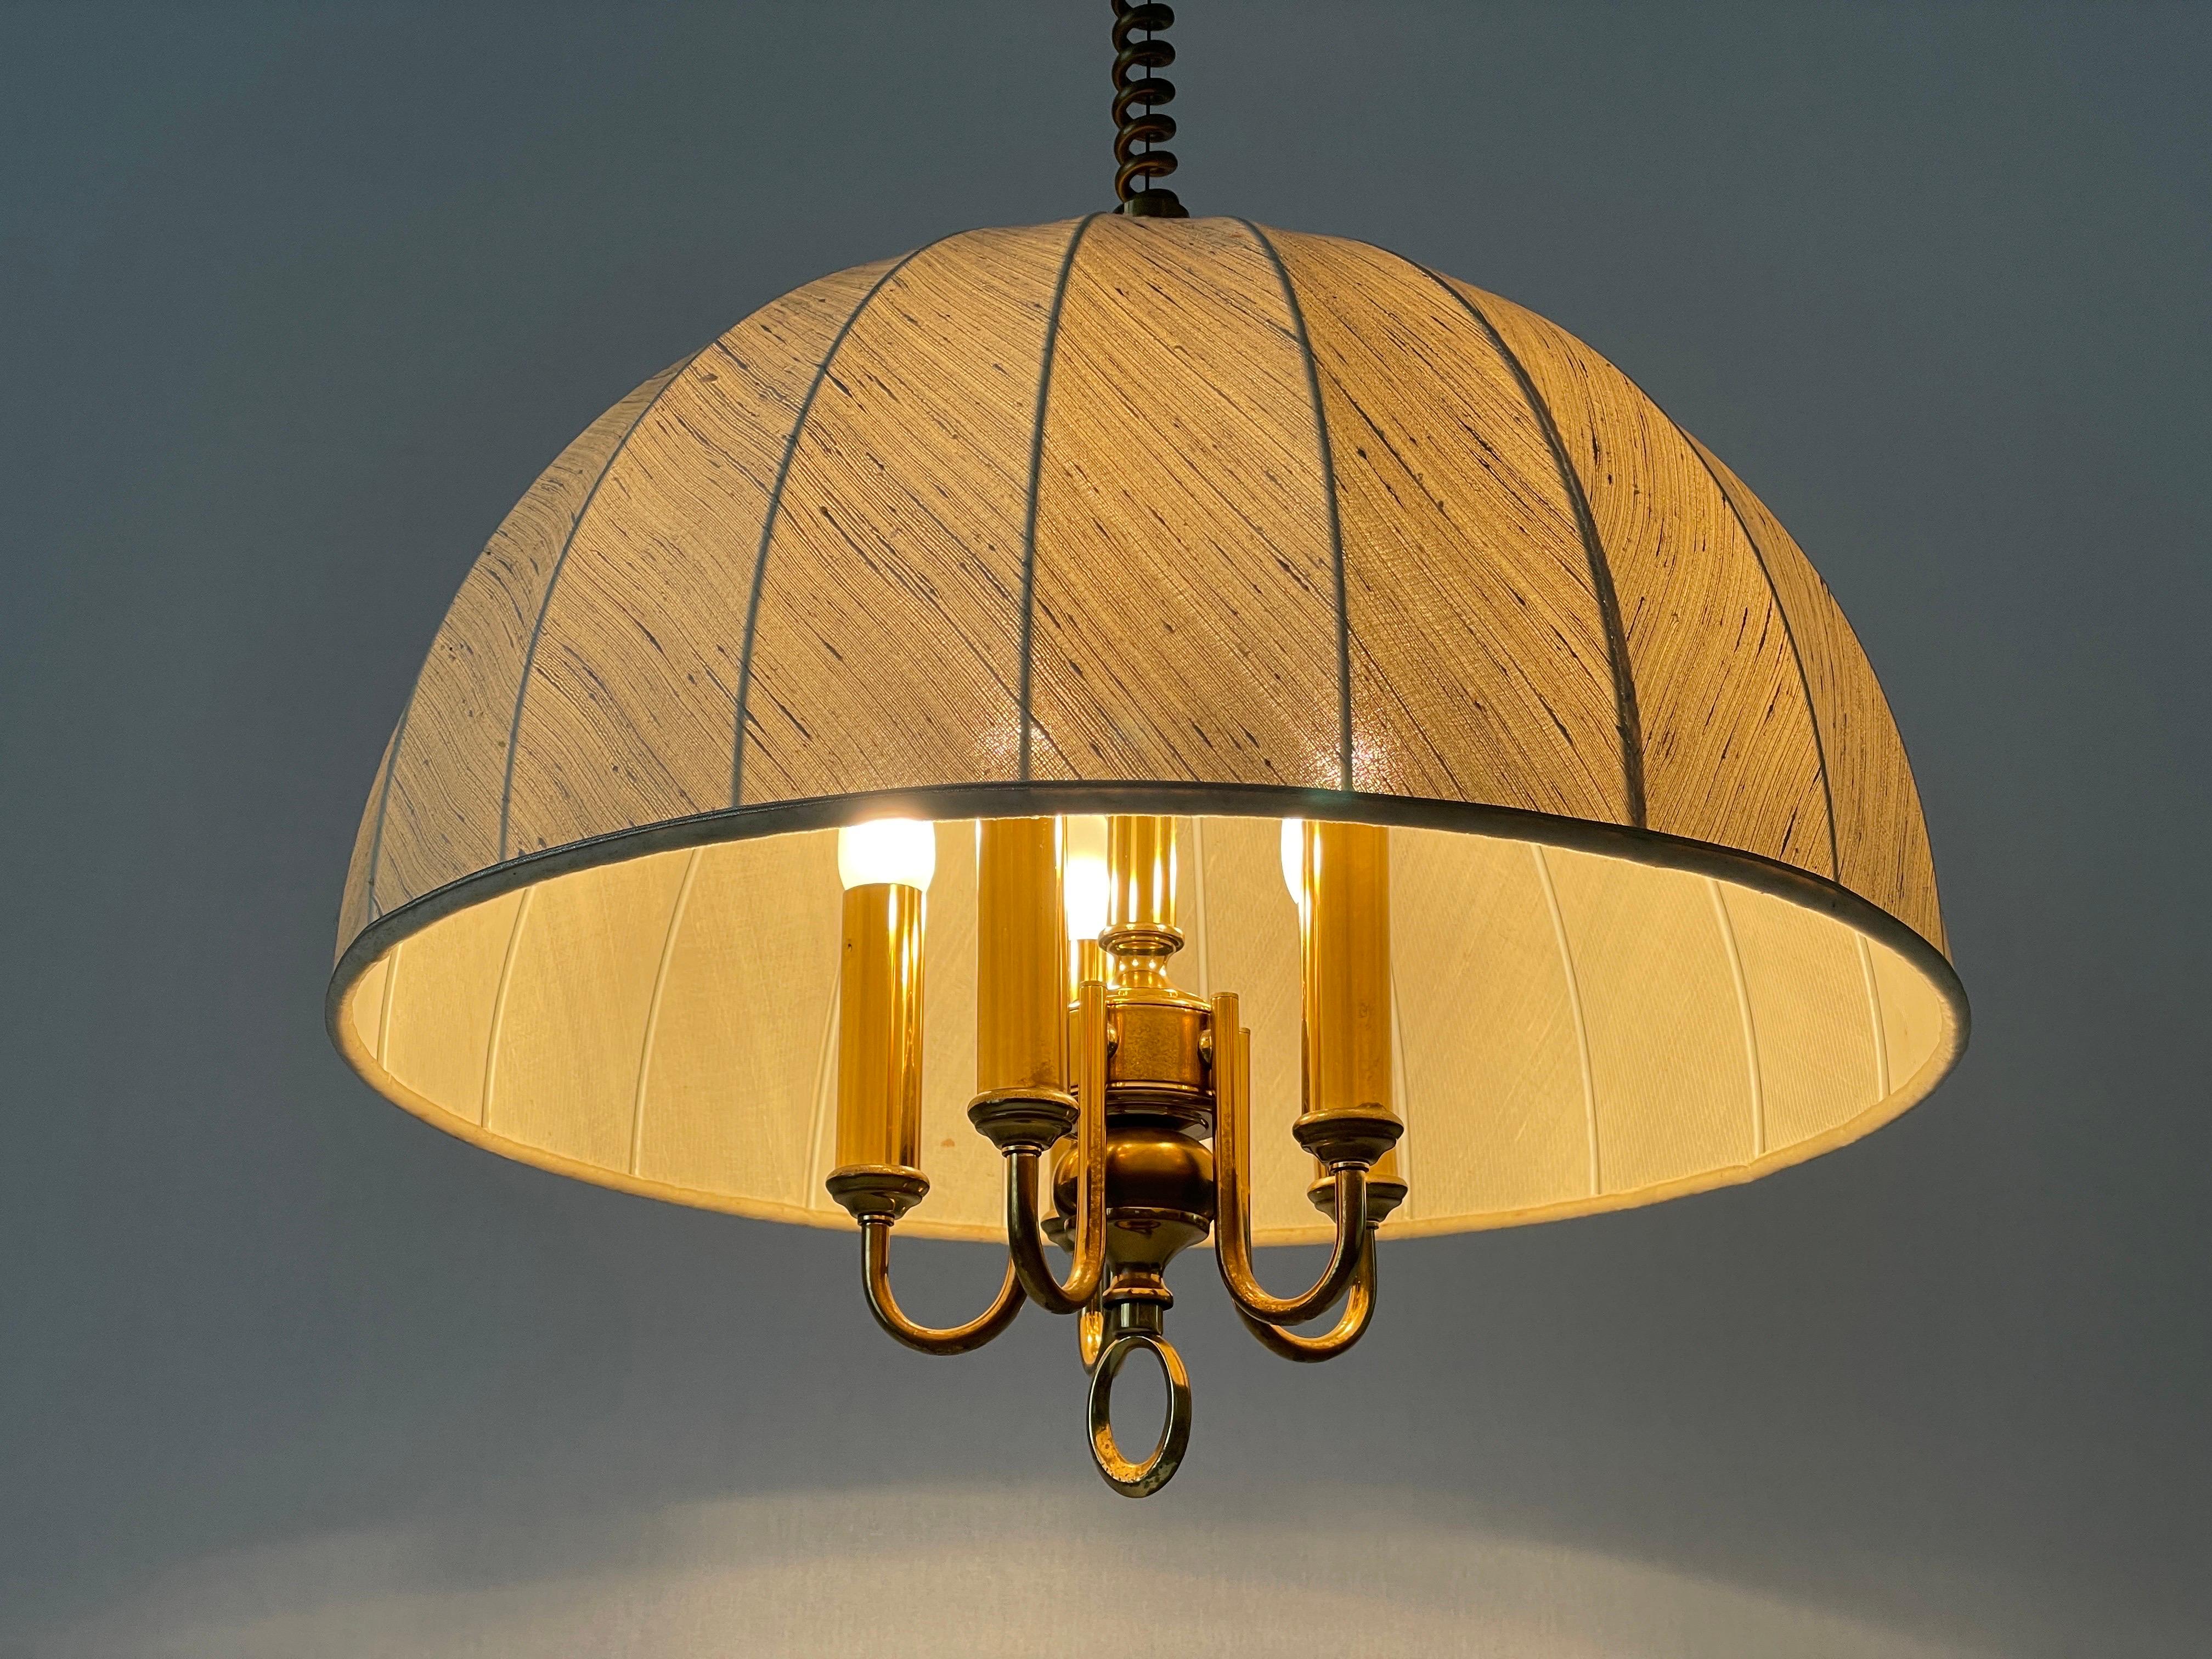 Fabric and Brass 5 socket Adjustable Shade Pendant Lamp by WKR, 1970s, Germany For Sale 8